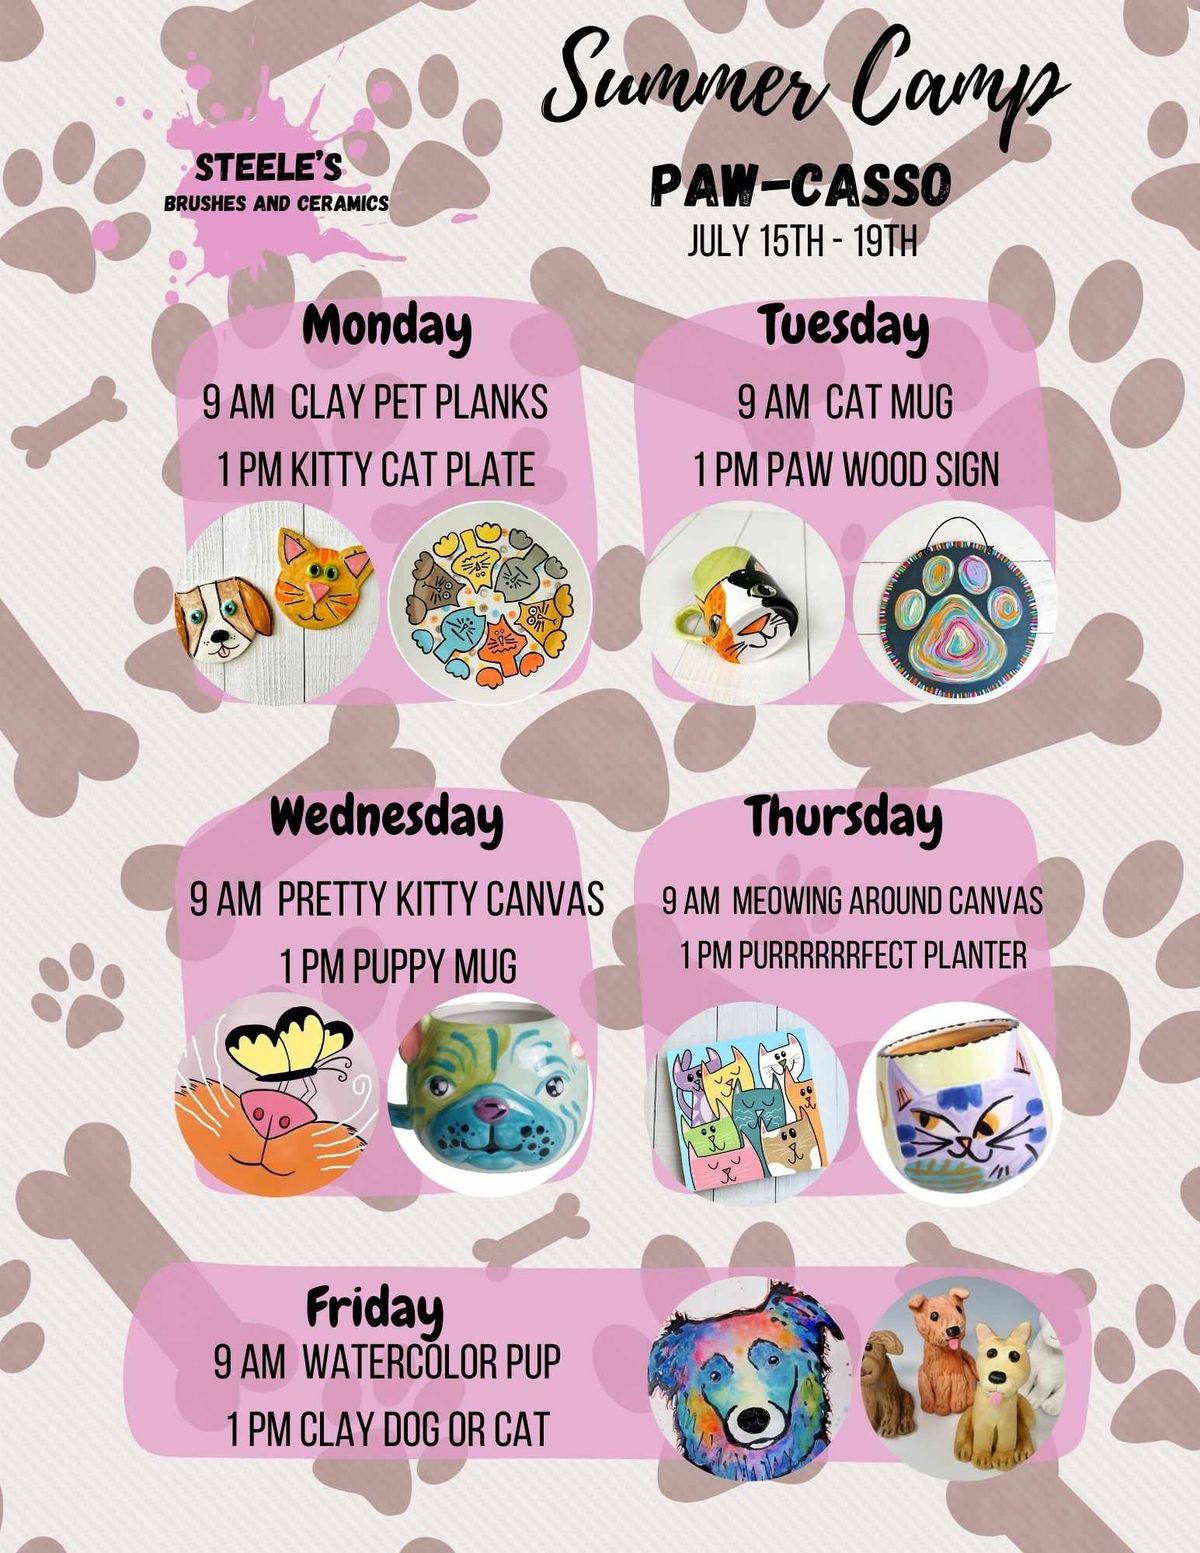 Summer Camp: Paw-Casso July 15th-19th